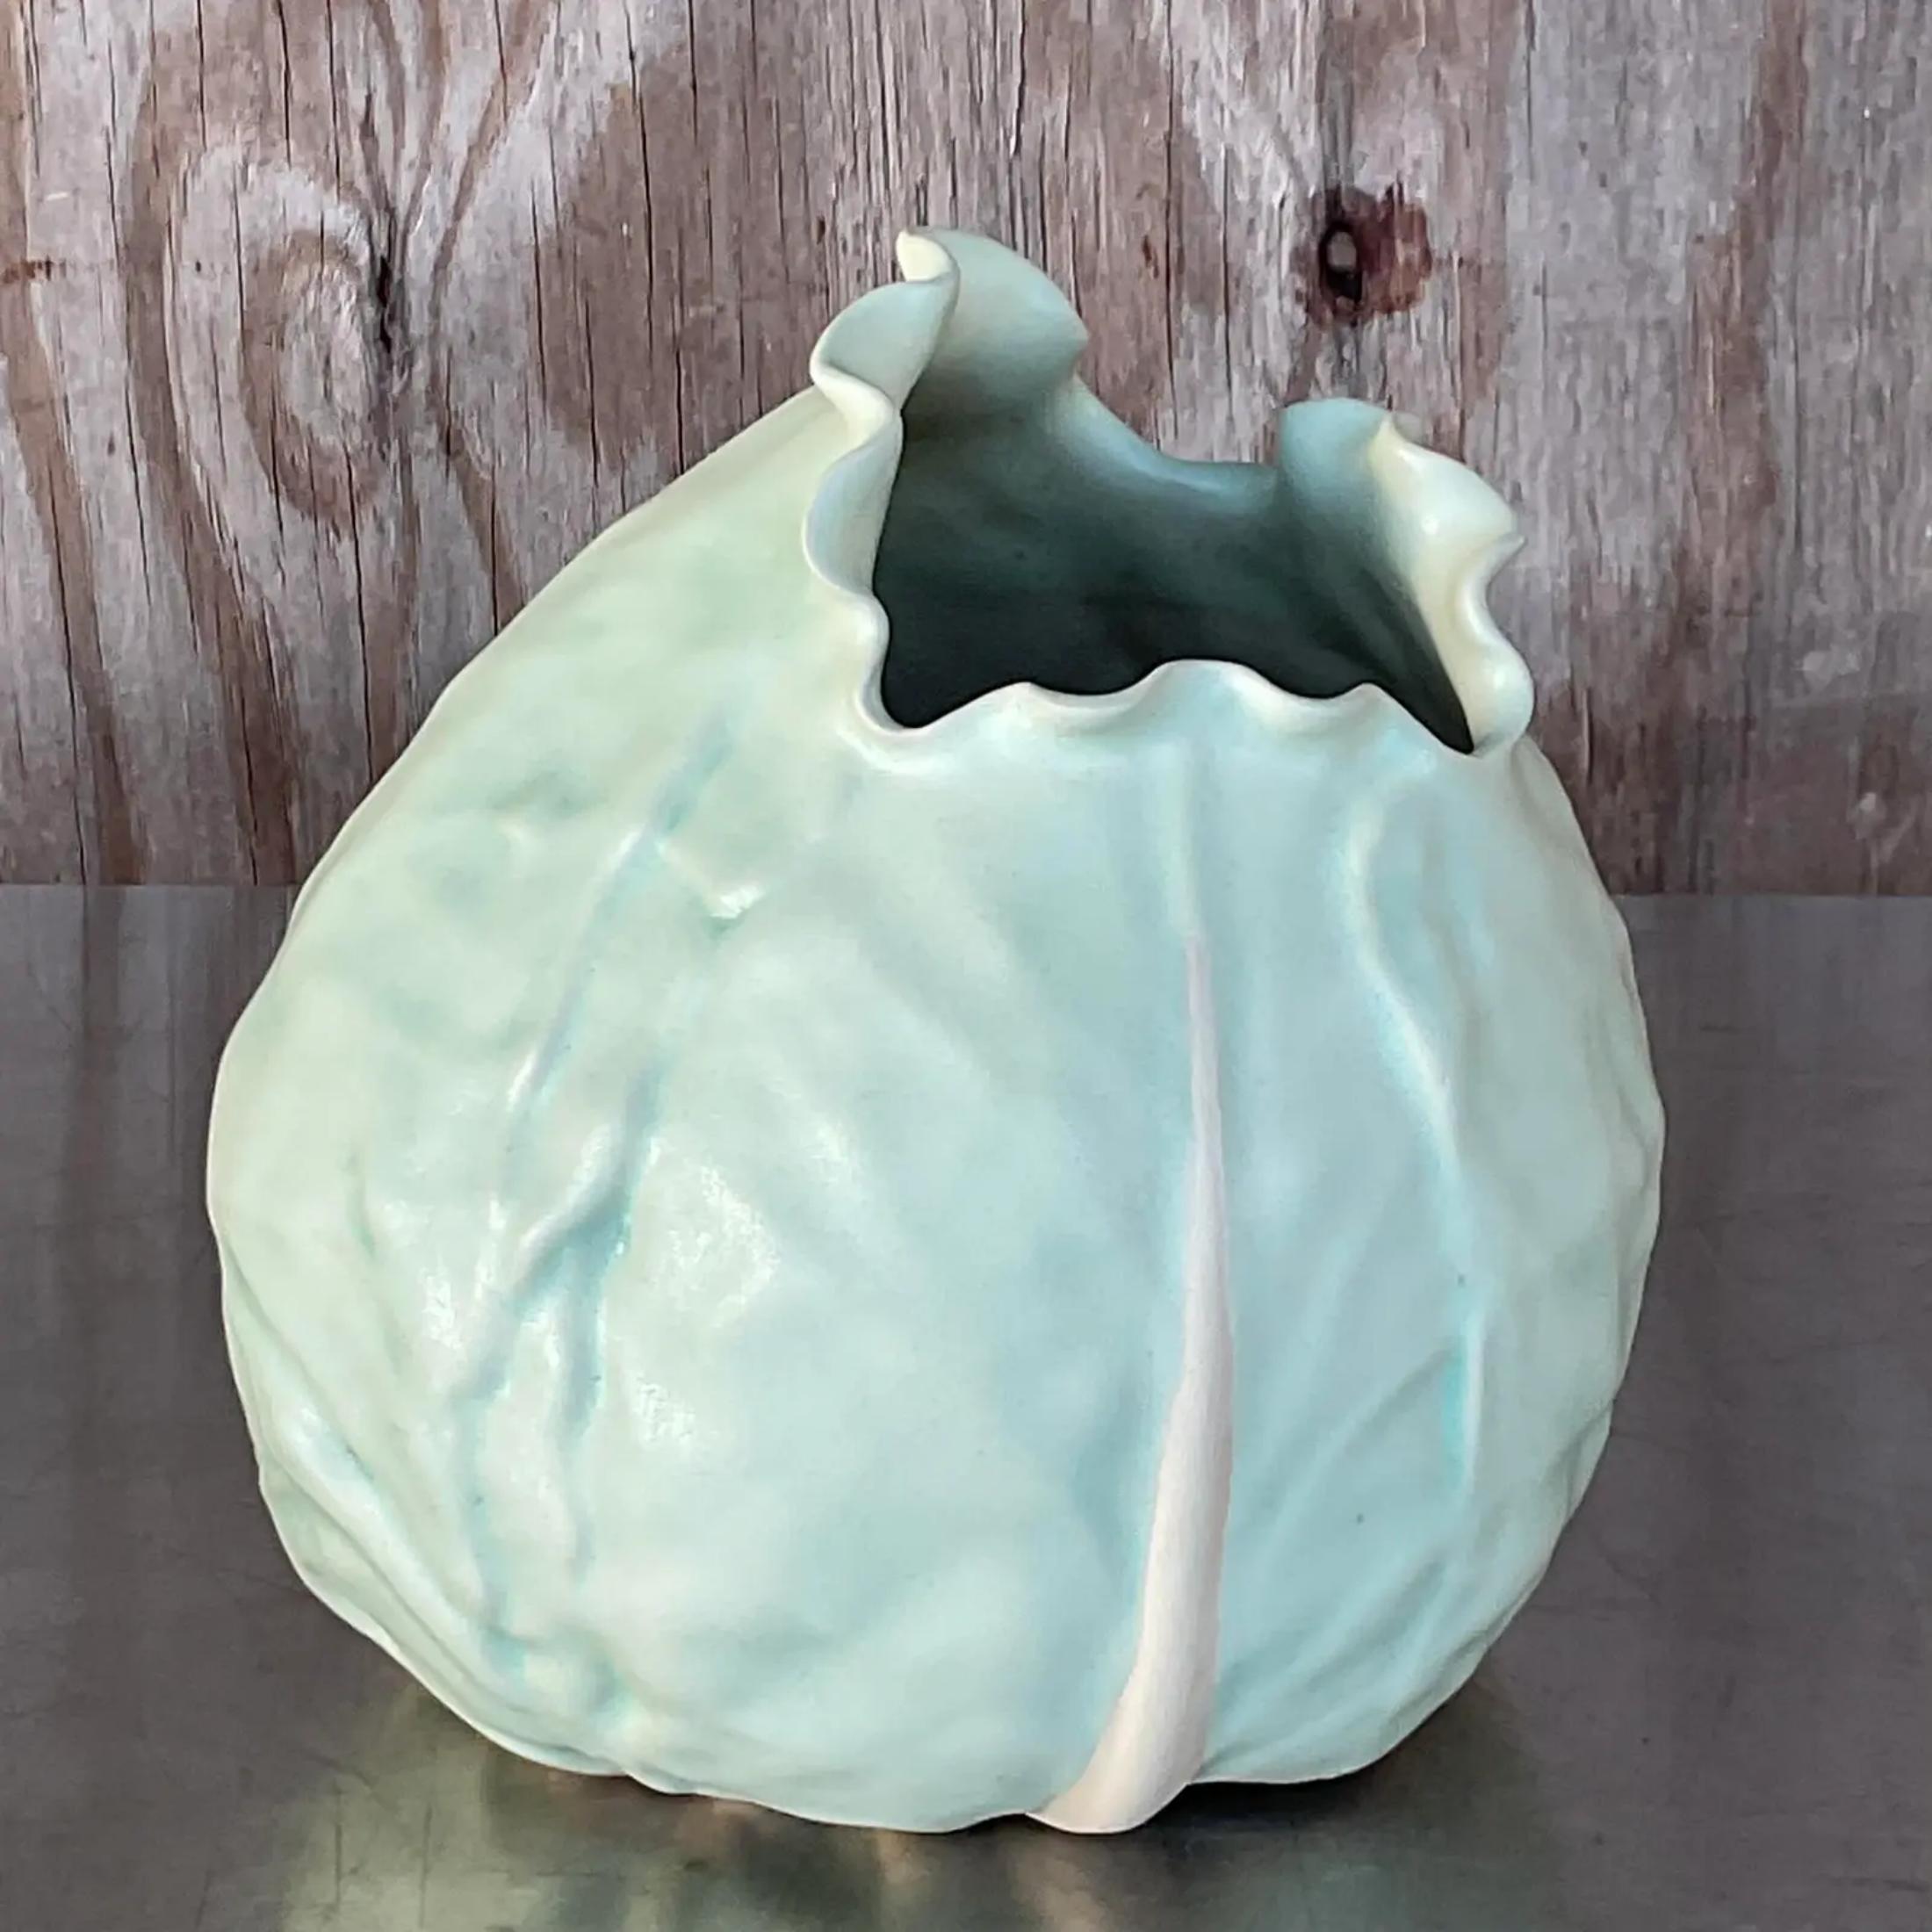 A fantastic vintage Boho ceramic cabbage. A beautiful pale green in a matte glazed finish. Signed on the bottom. Acquired from a Palm Beach estate